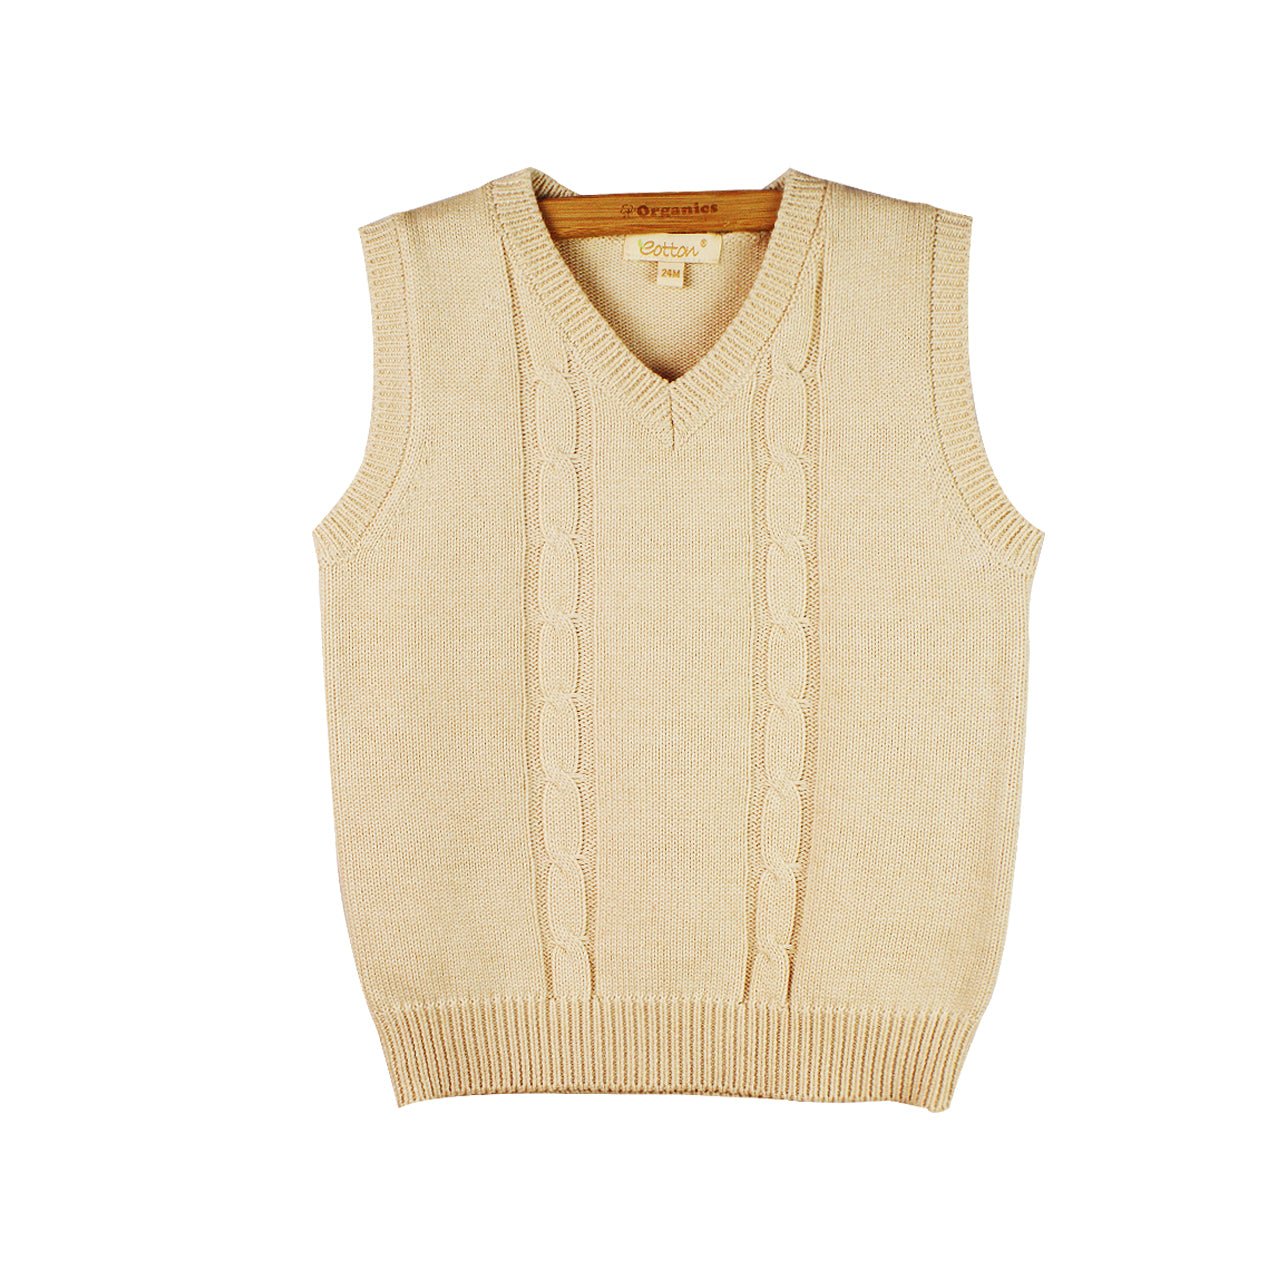 Best Organic Cotton Knitted Vest | Baby V neck Sweater - EottonCanada